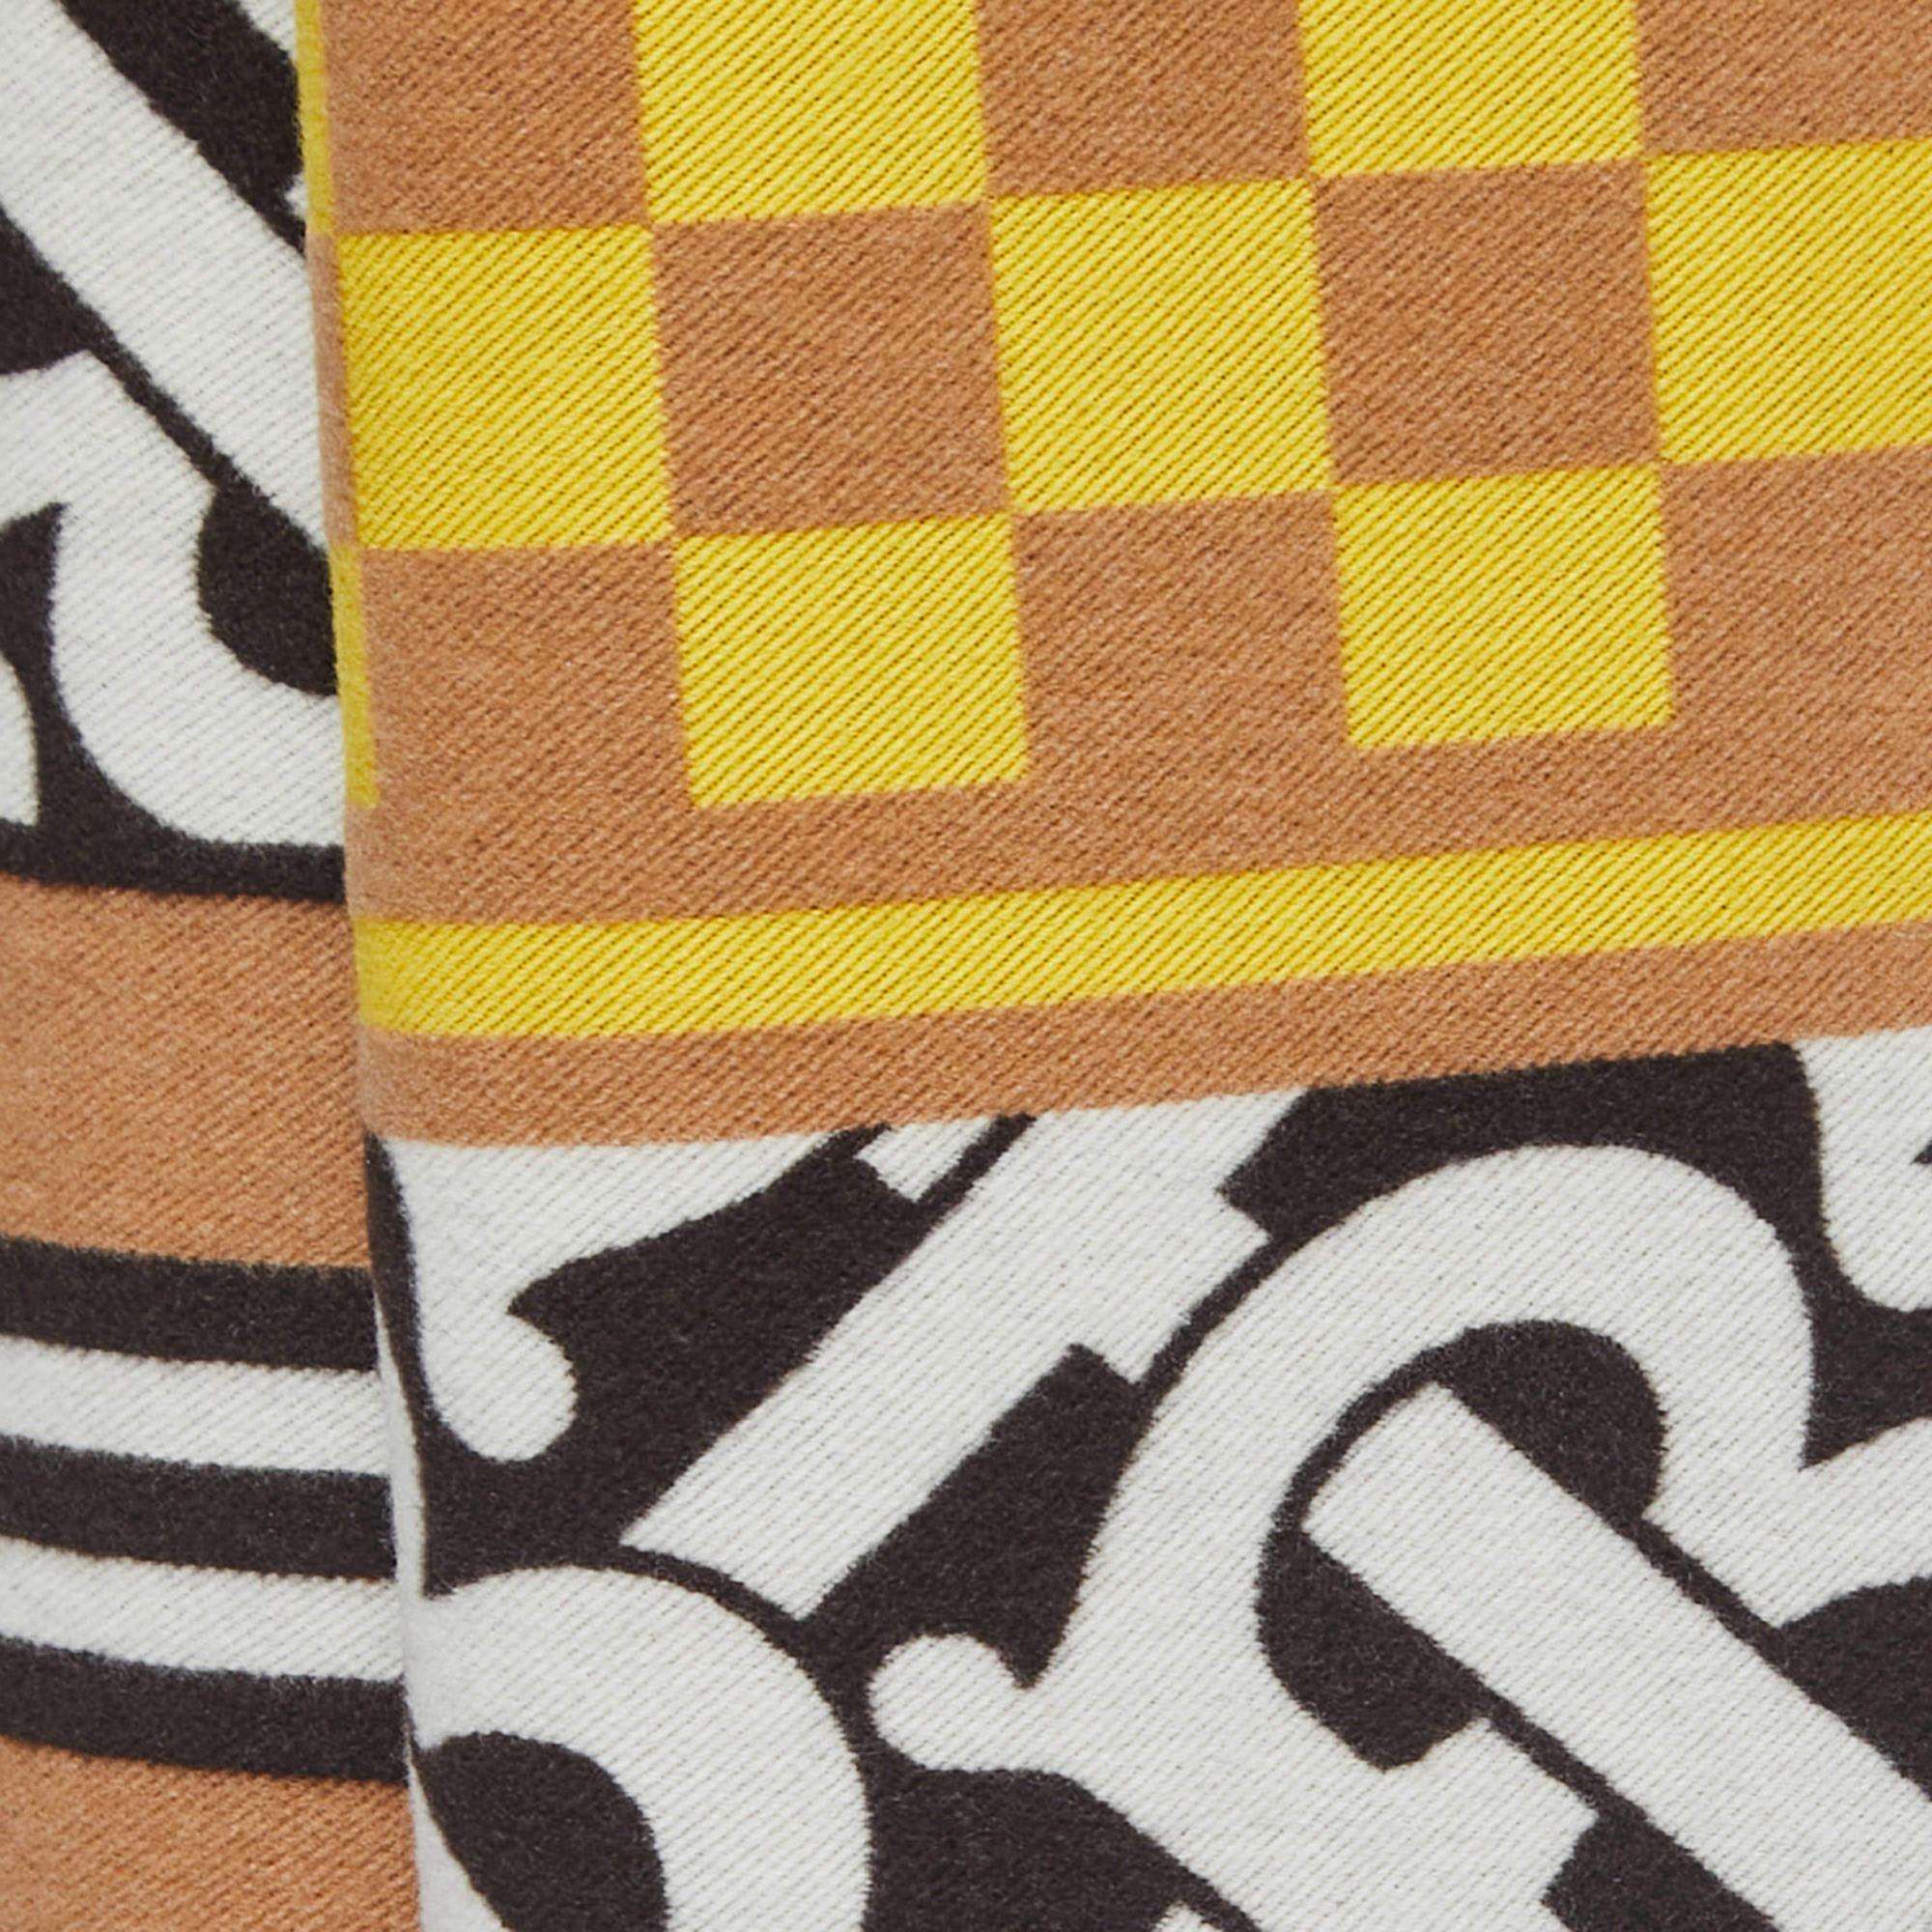 Beige Burberry Multicolor Checkboard Football Patterned Cashmere Scarf